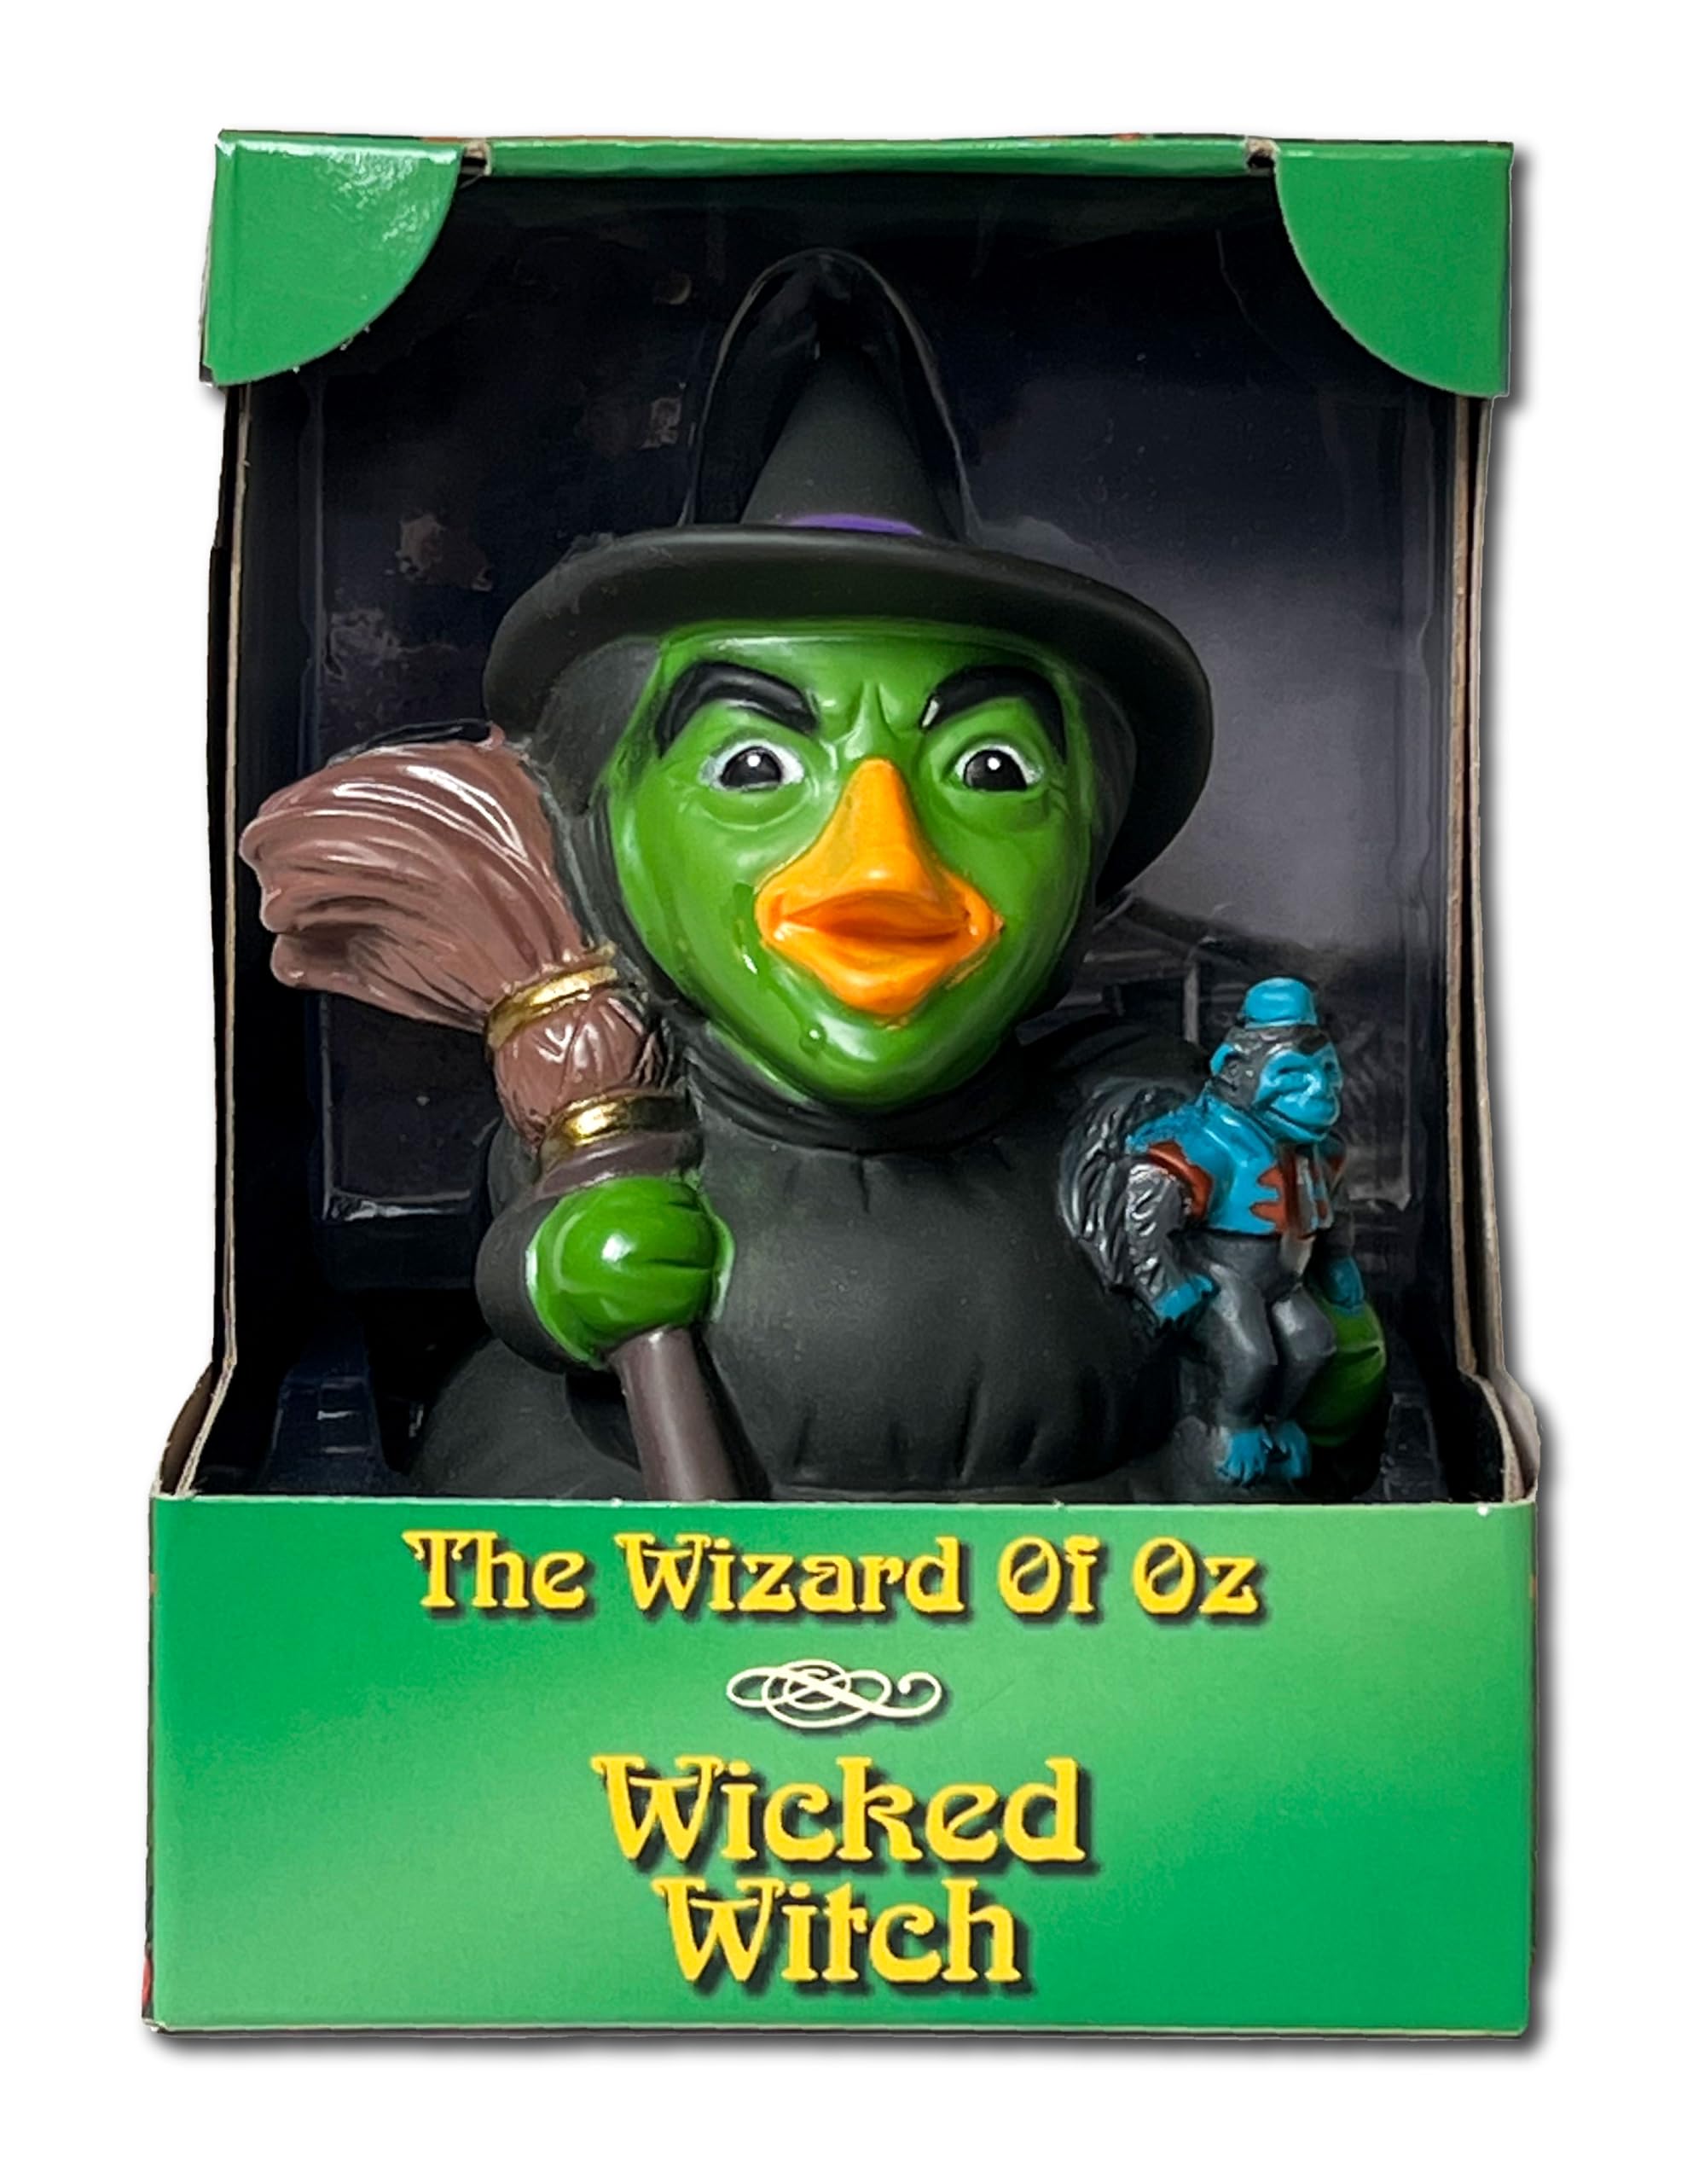 CelebriDucks - Wicked Witch - Floating Rubber Ducks - Collectible Bath Toy Gift for Kids & Adults of All Ages